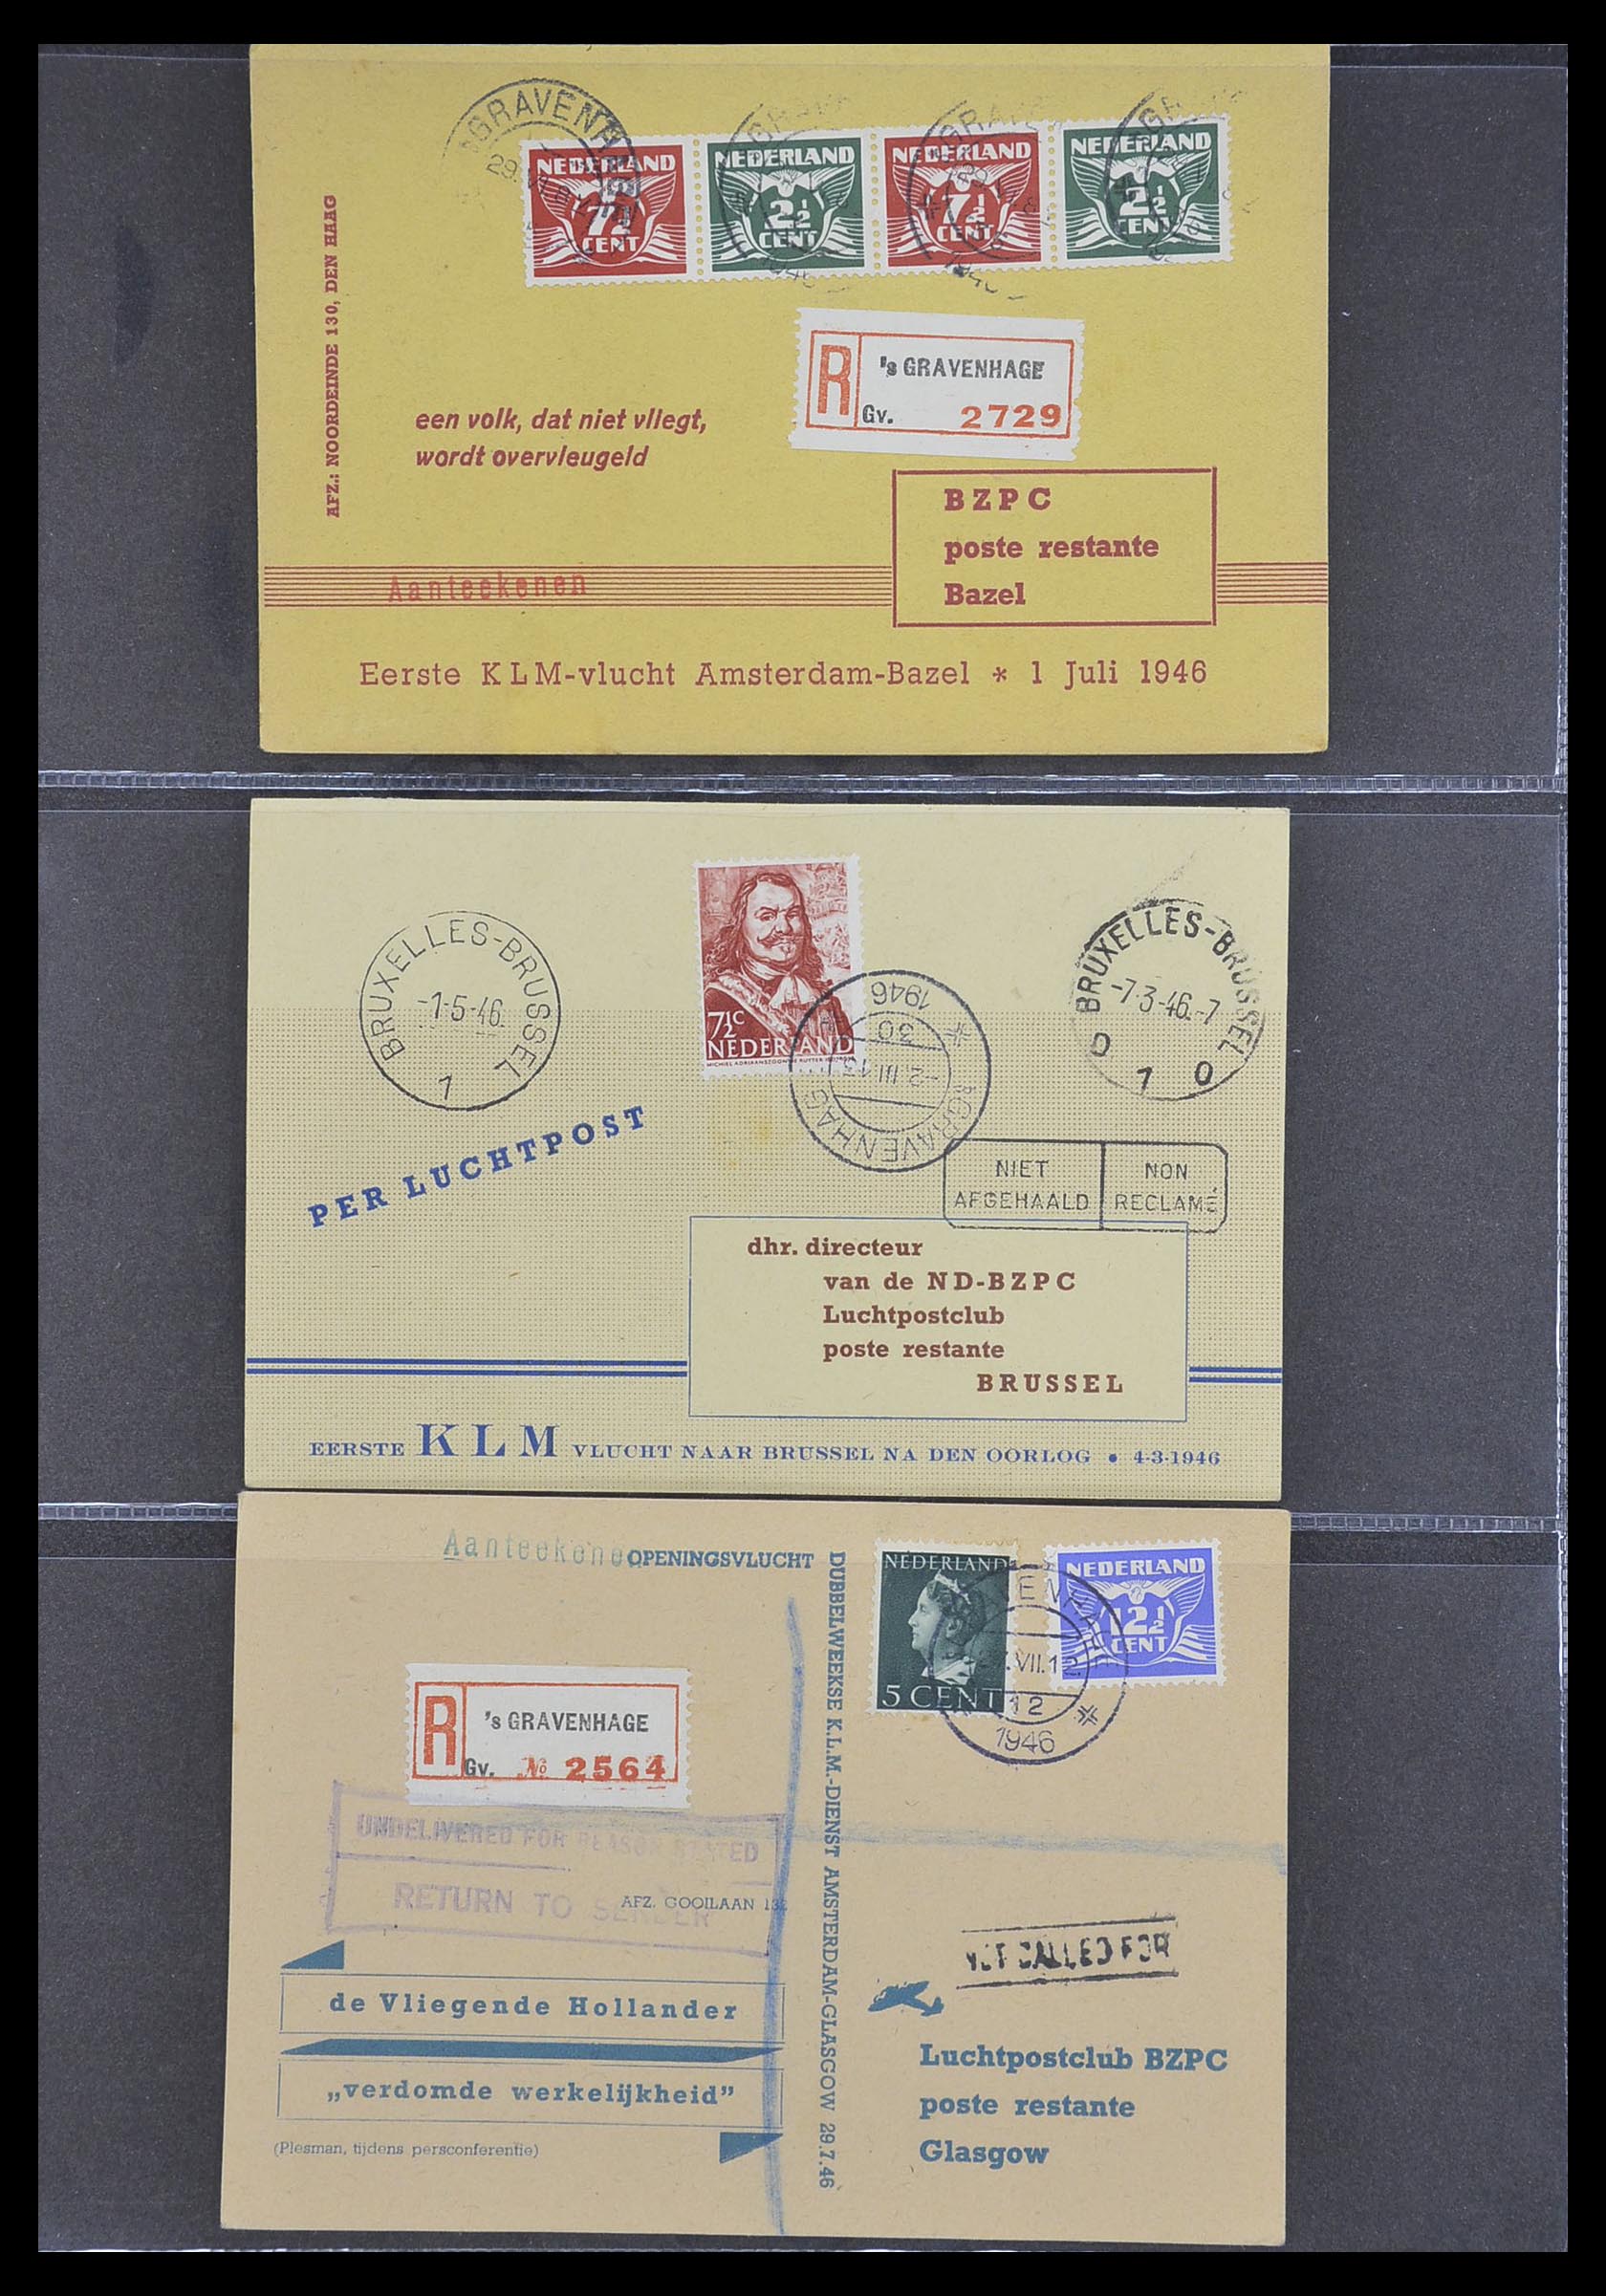 33330 169 - Stamp collection 33330 Netherlands covers 1852-1959.